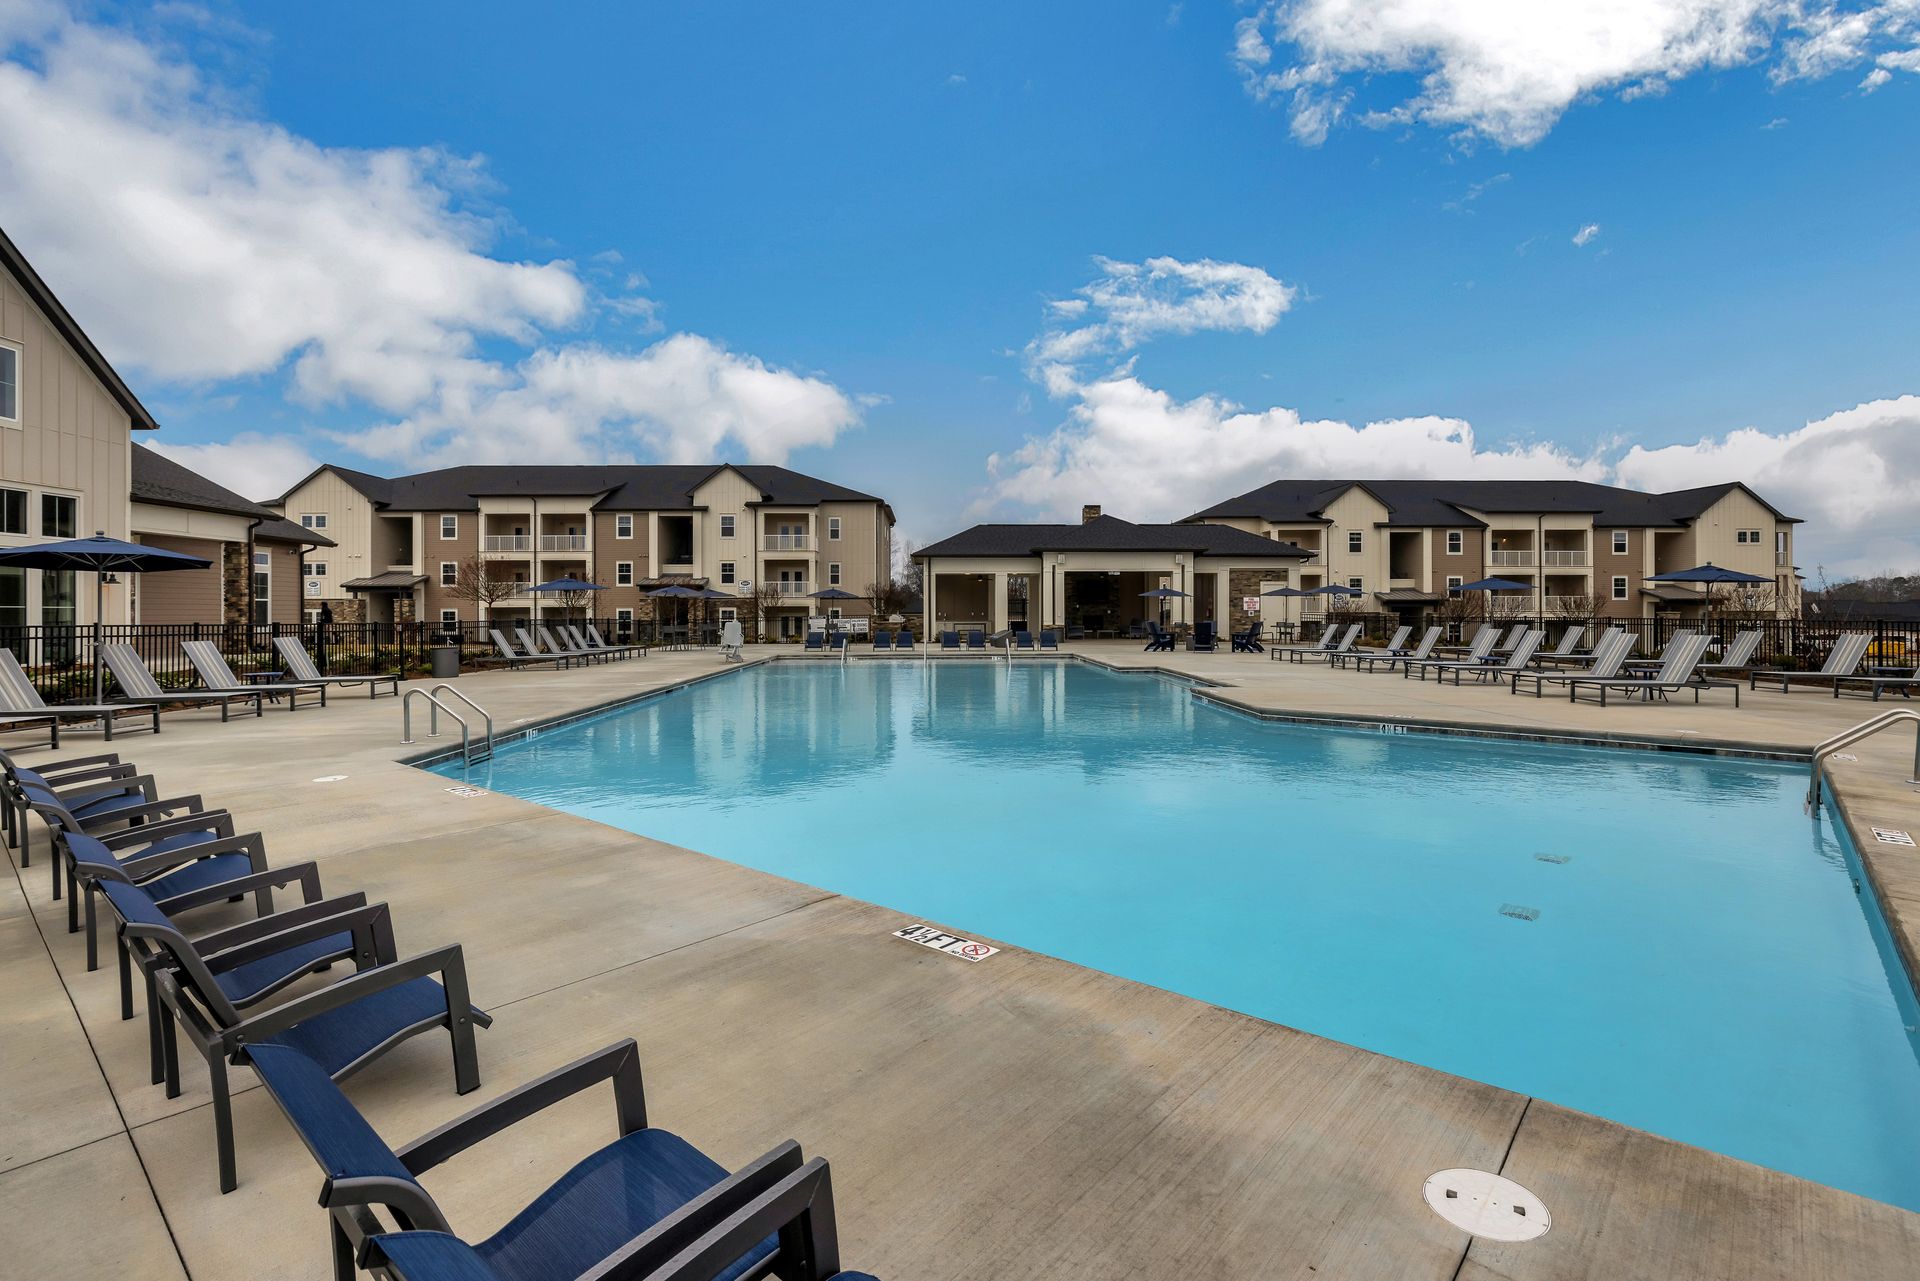 A large swimming pool surrounded by chairs and a building at The Standard at Pinestone. 